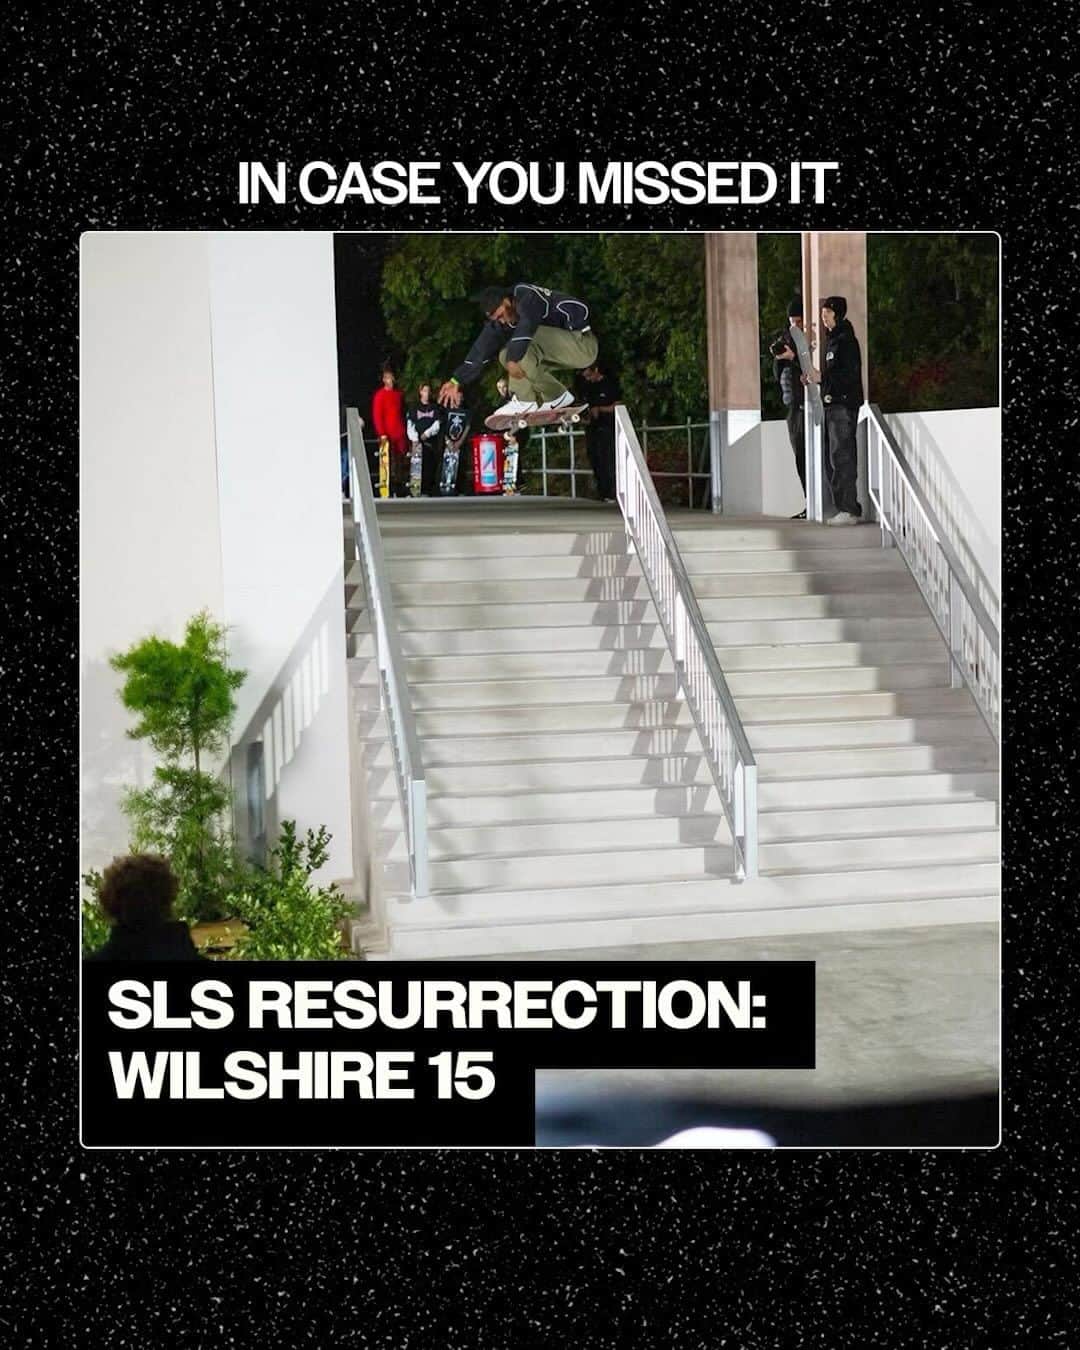 The Berricsのインスタグラム：「In Case You Missed It…   @sls premiered its 2nd spot from the “Sls Resurrection” series where street spots of the past are brought back to life. Spot # 2 was the legendary Wilshire 15 (a Los Angeles classic). In a winner take all session, the top skaters from around the world threw down on this one of a kind replica for cash 💵 from the one and only @beagleoneism !! But in the end it was @jhankgonzalez1 that emerged victorious as the Resurrection Spot No. 2 Winner 🏆!!   Hit the link in bio to watch @sls “Resurrection: Wilshire 15” now showing on TheBerrics.com #skateboardingisfun #berrics #sls   📸: @bailey.bs」